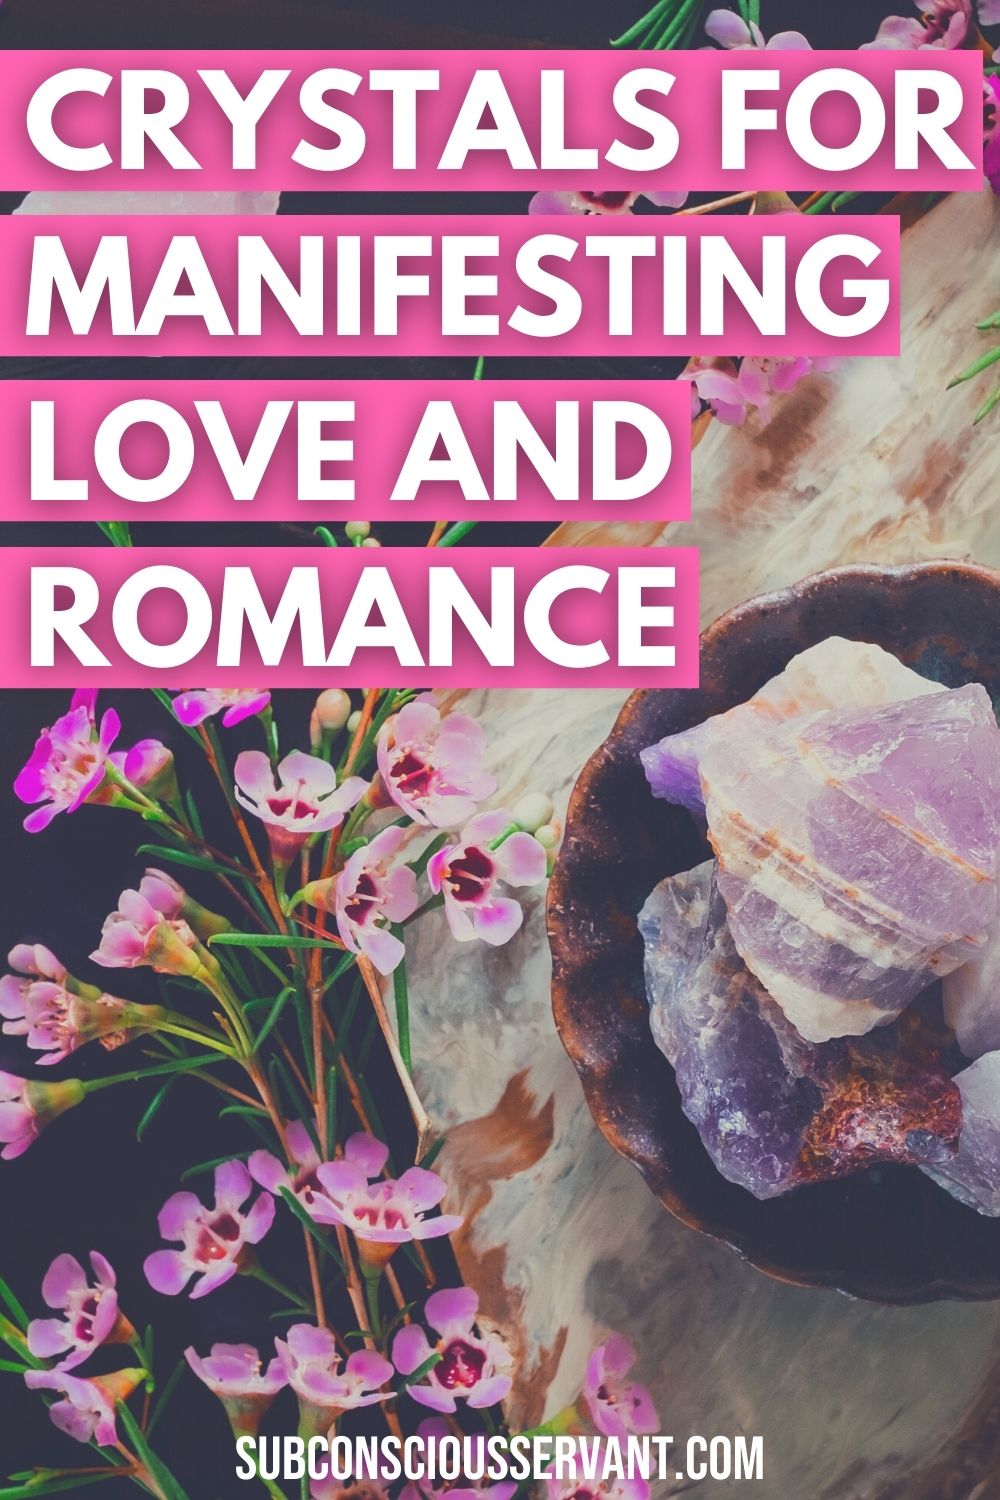 Crystals For Manifesting Love And Romance (The 17 Best Ones)